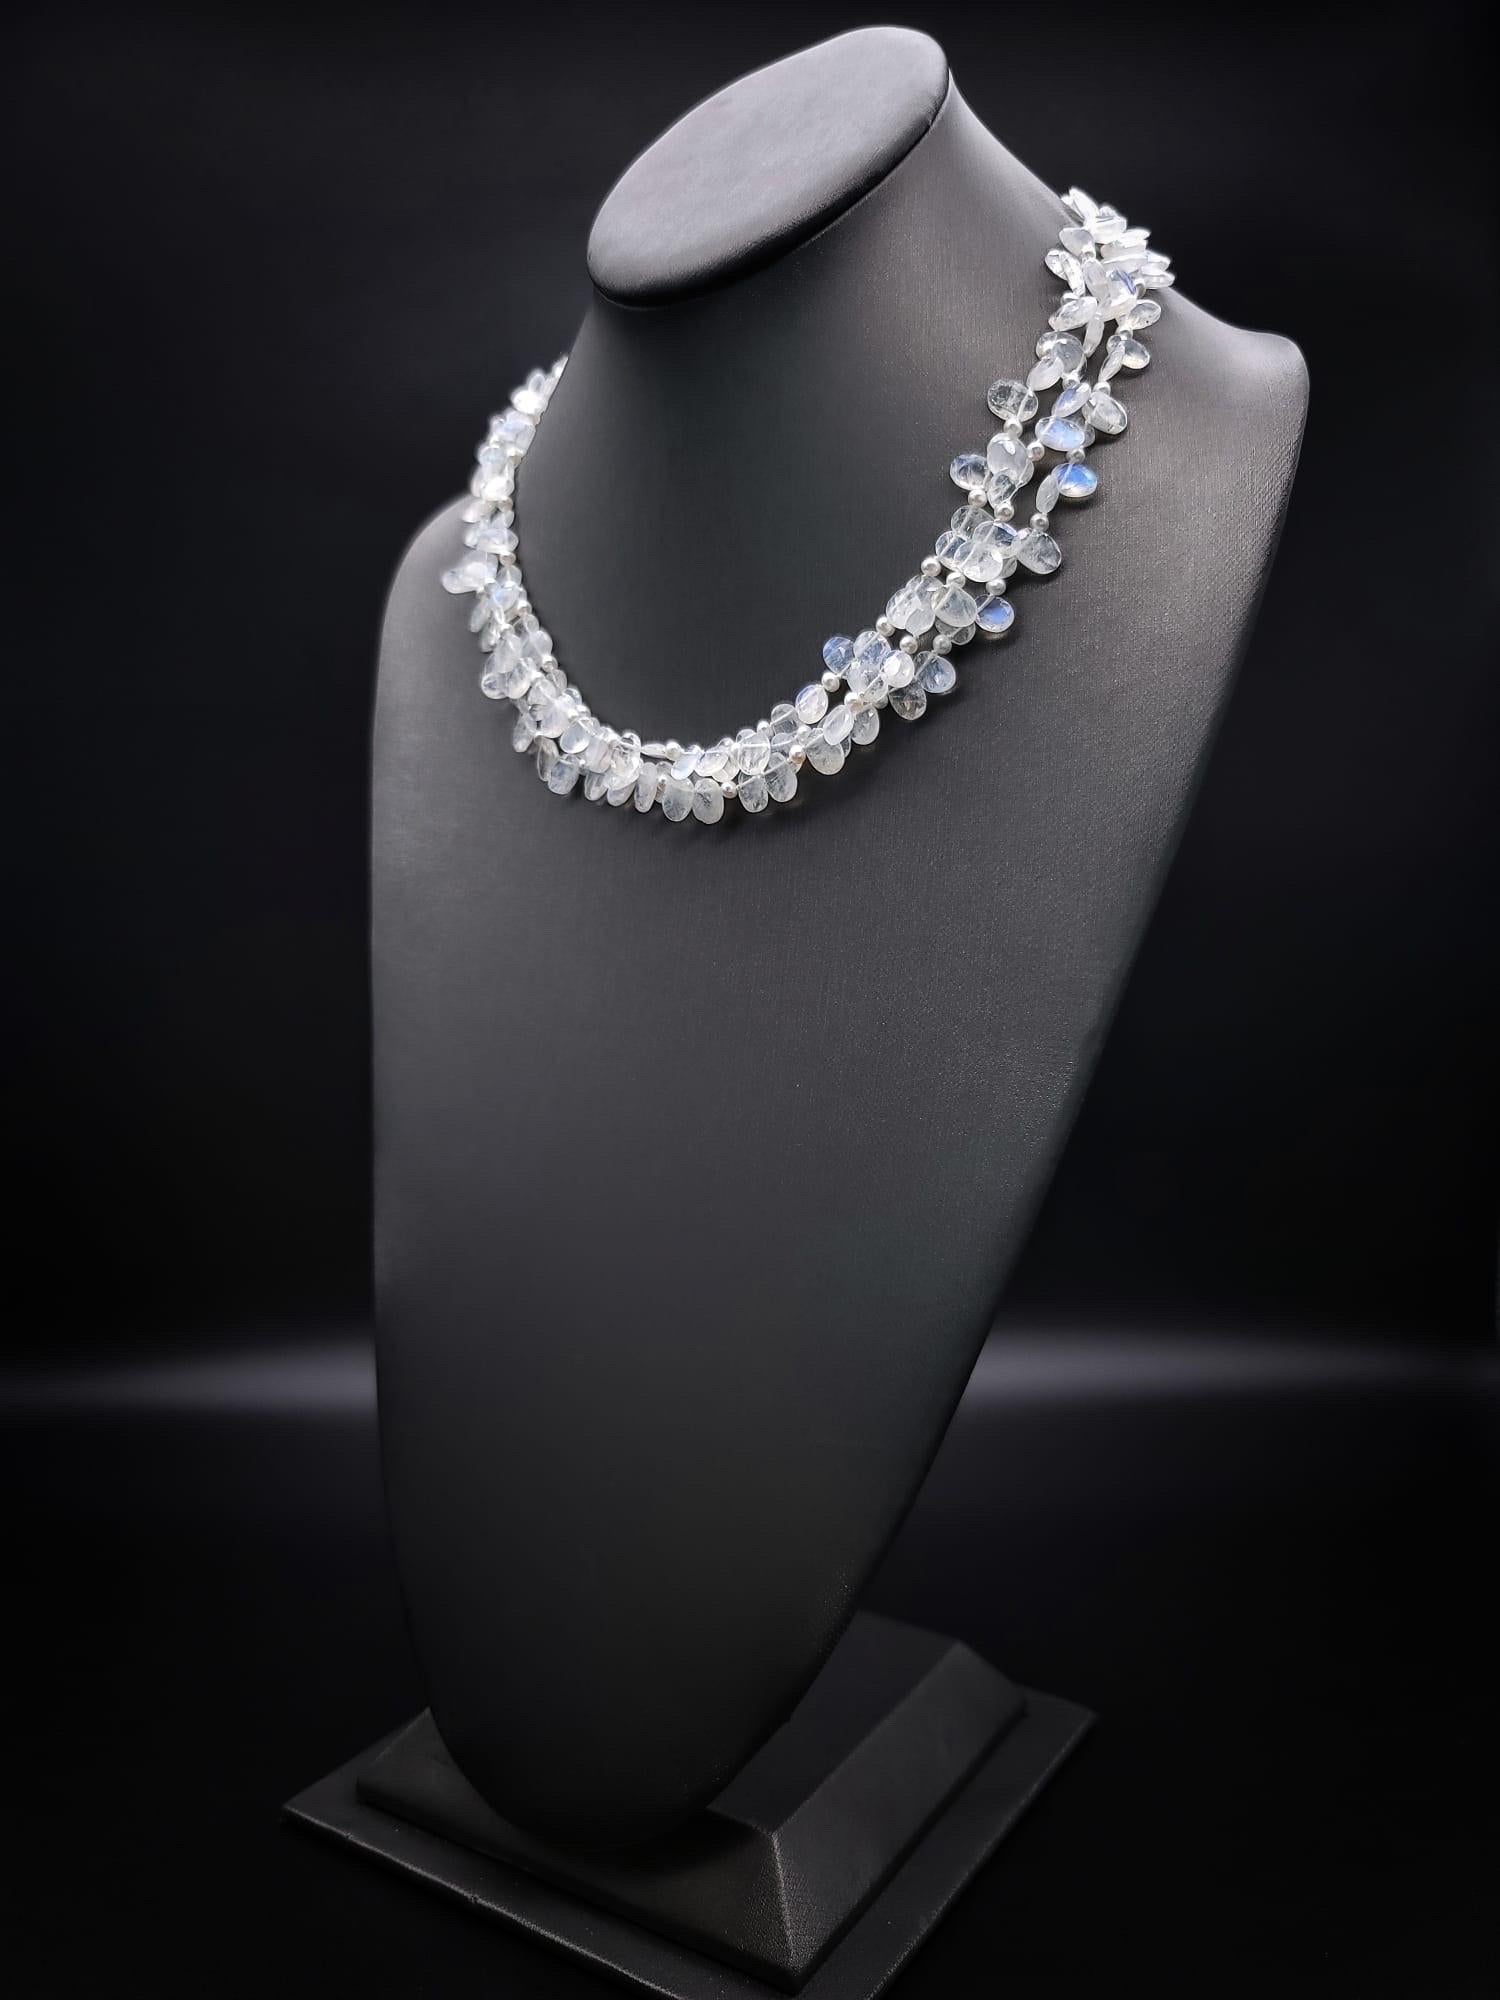 One-of-a-Kind

3 strands of facetted teardrop rainbow Moonstones separated by seed pearls in a softly, flattering necklace. The 3 strands are gathered by large (12-14m.m) pearls to keep the moonstones in place and anchored with a sterling silver box